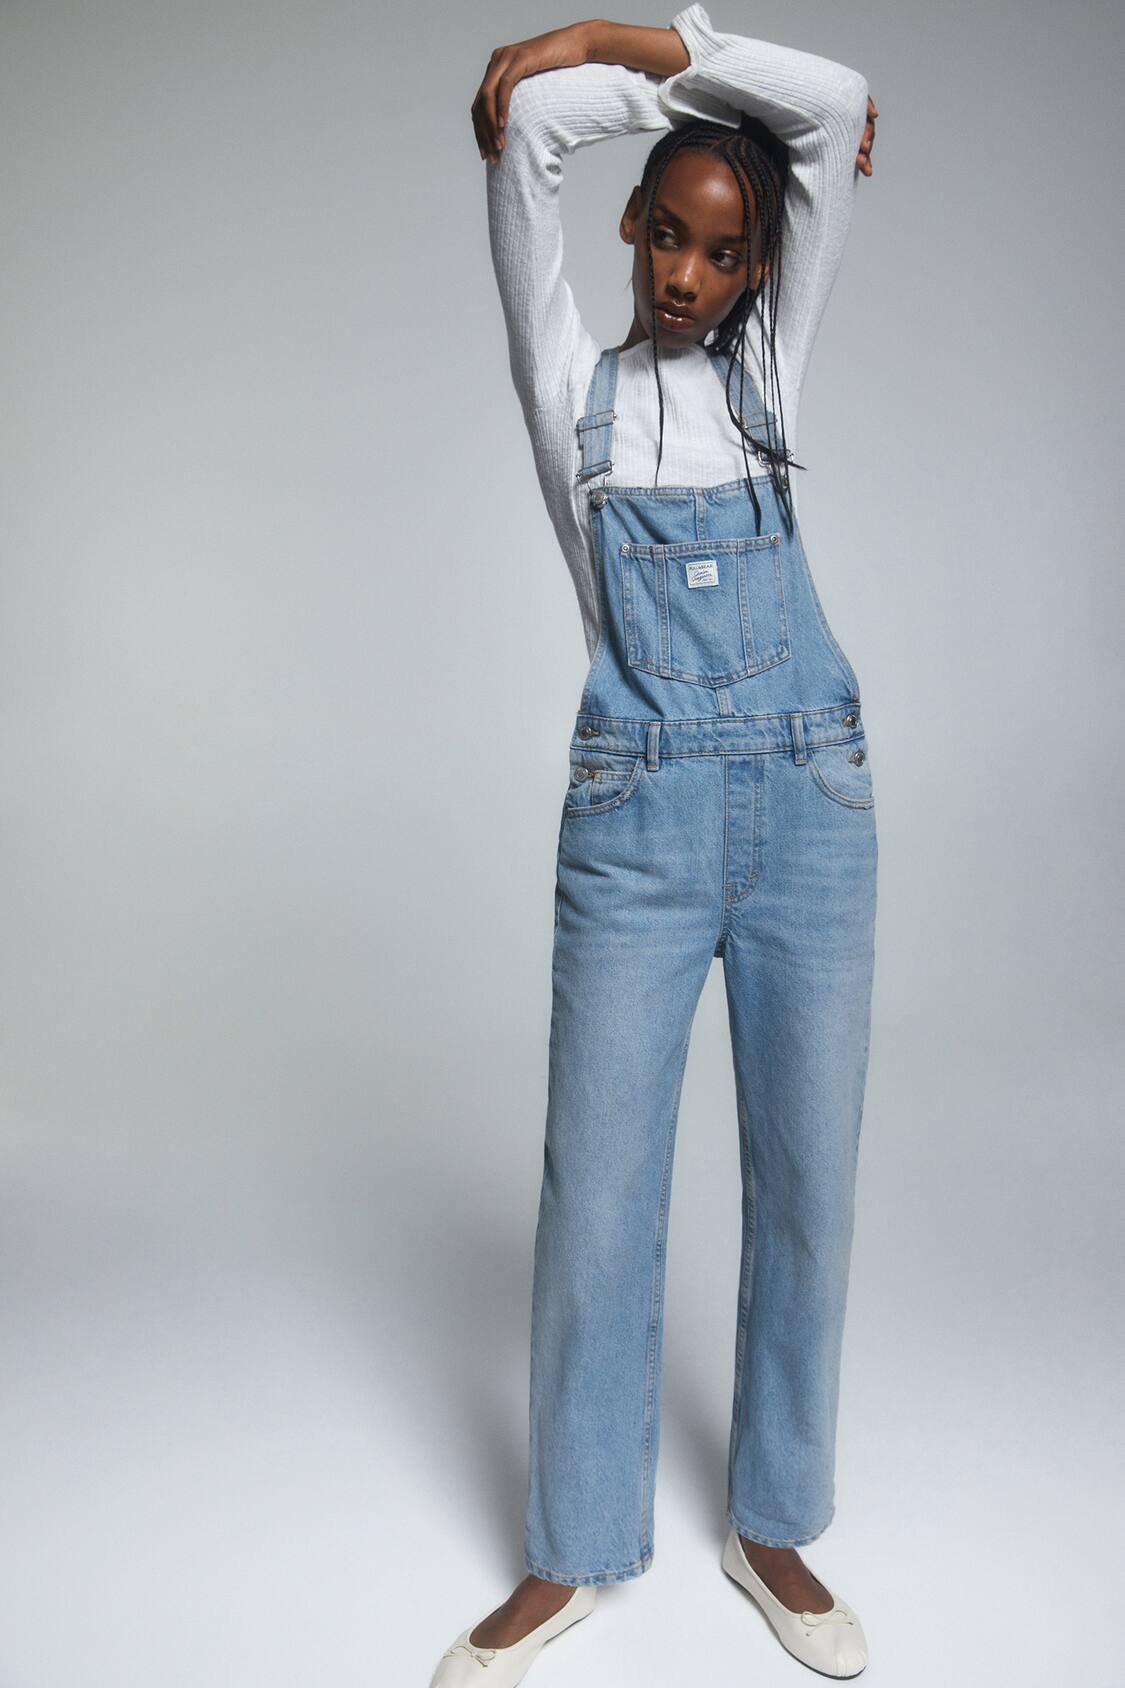 SIGN UP, Boyfriend Dungarees